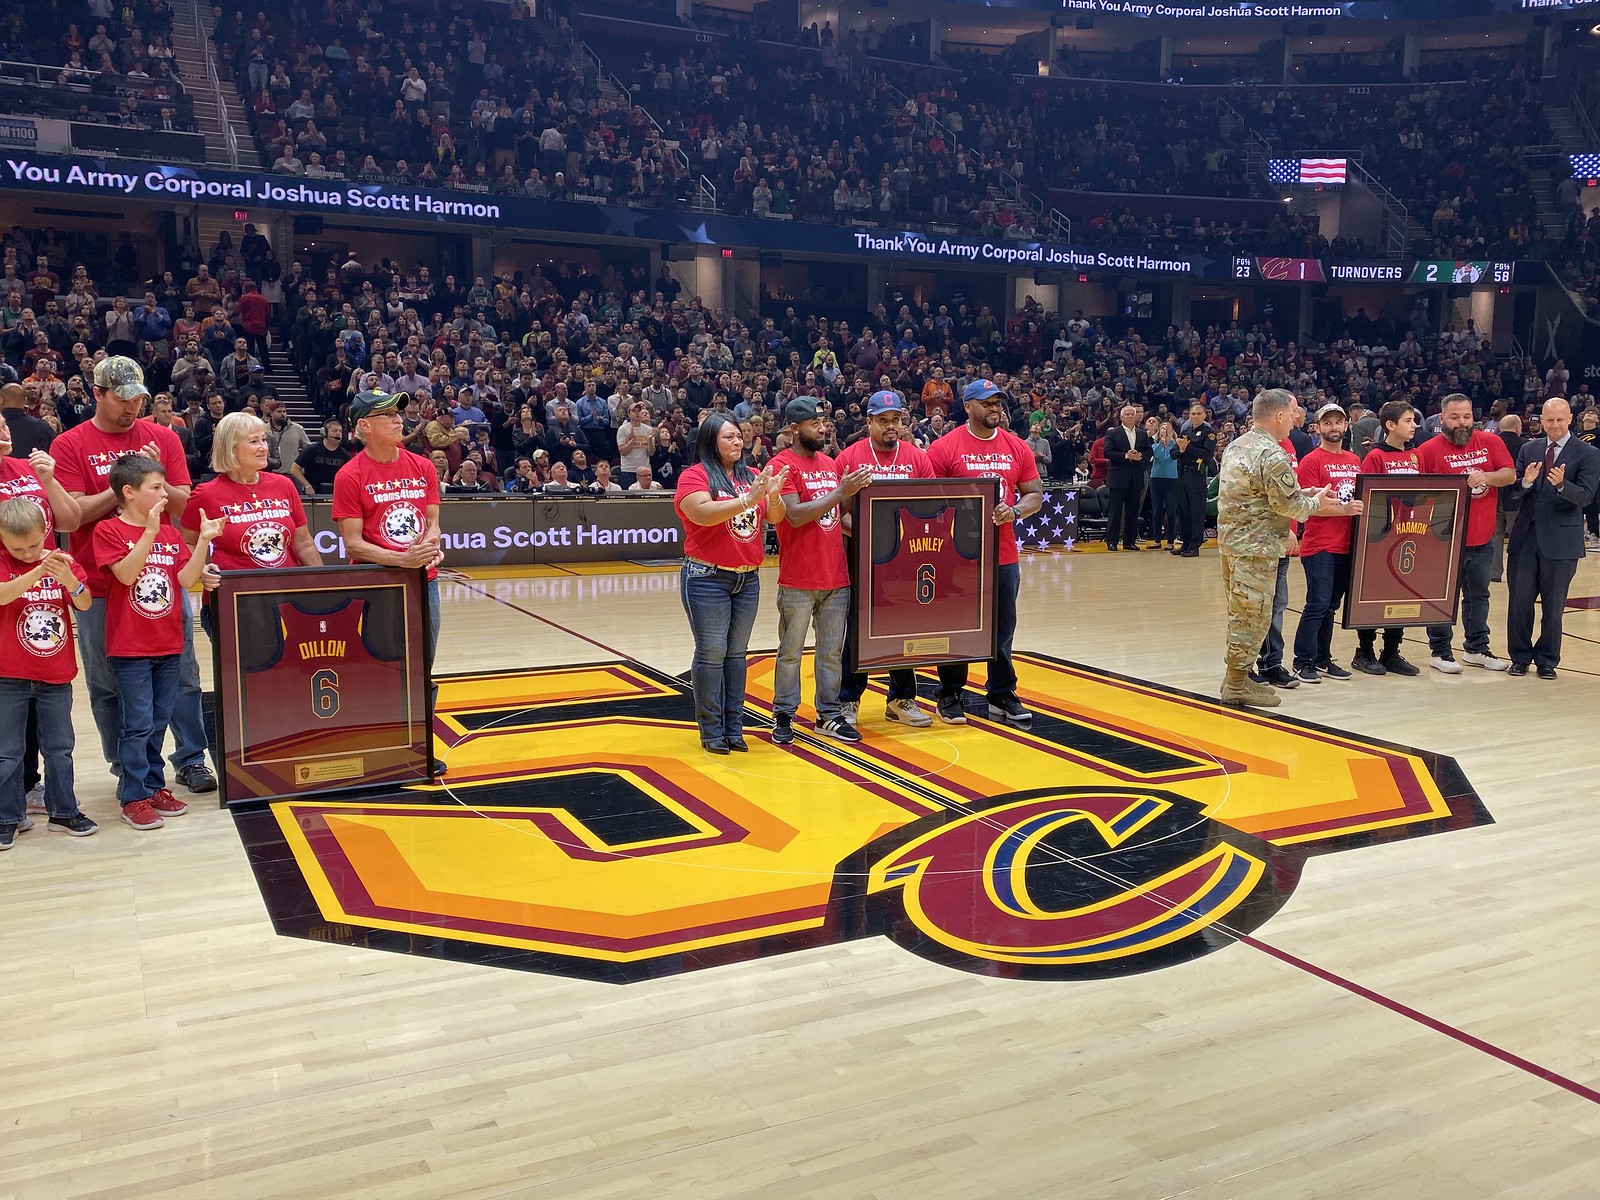 2019_T4T_Cleveland Cavaliers Hoops for Troops 22